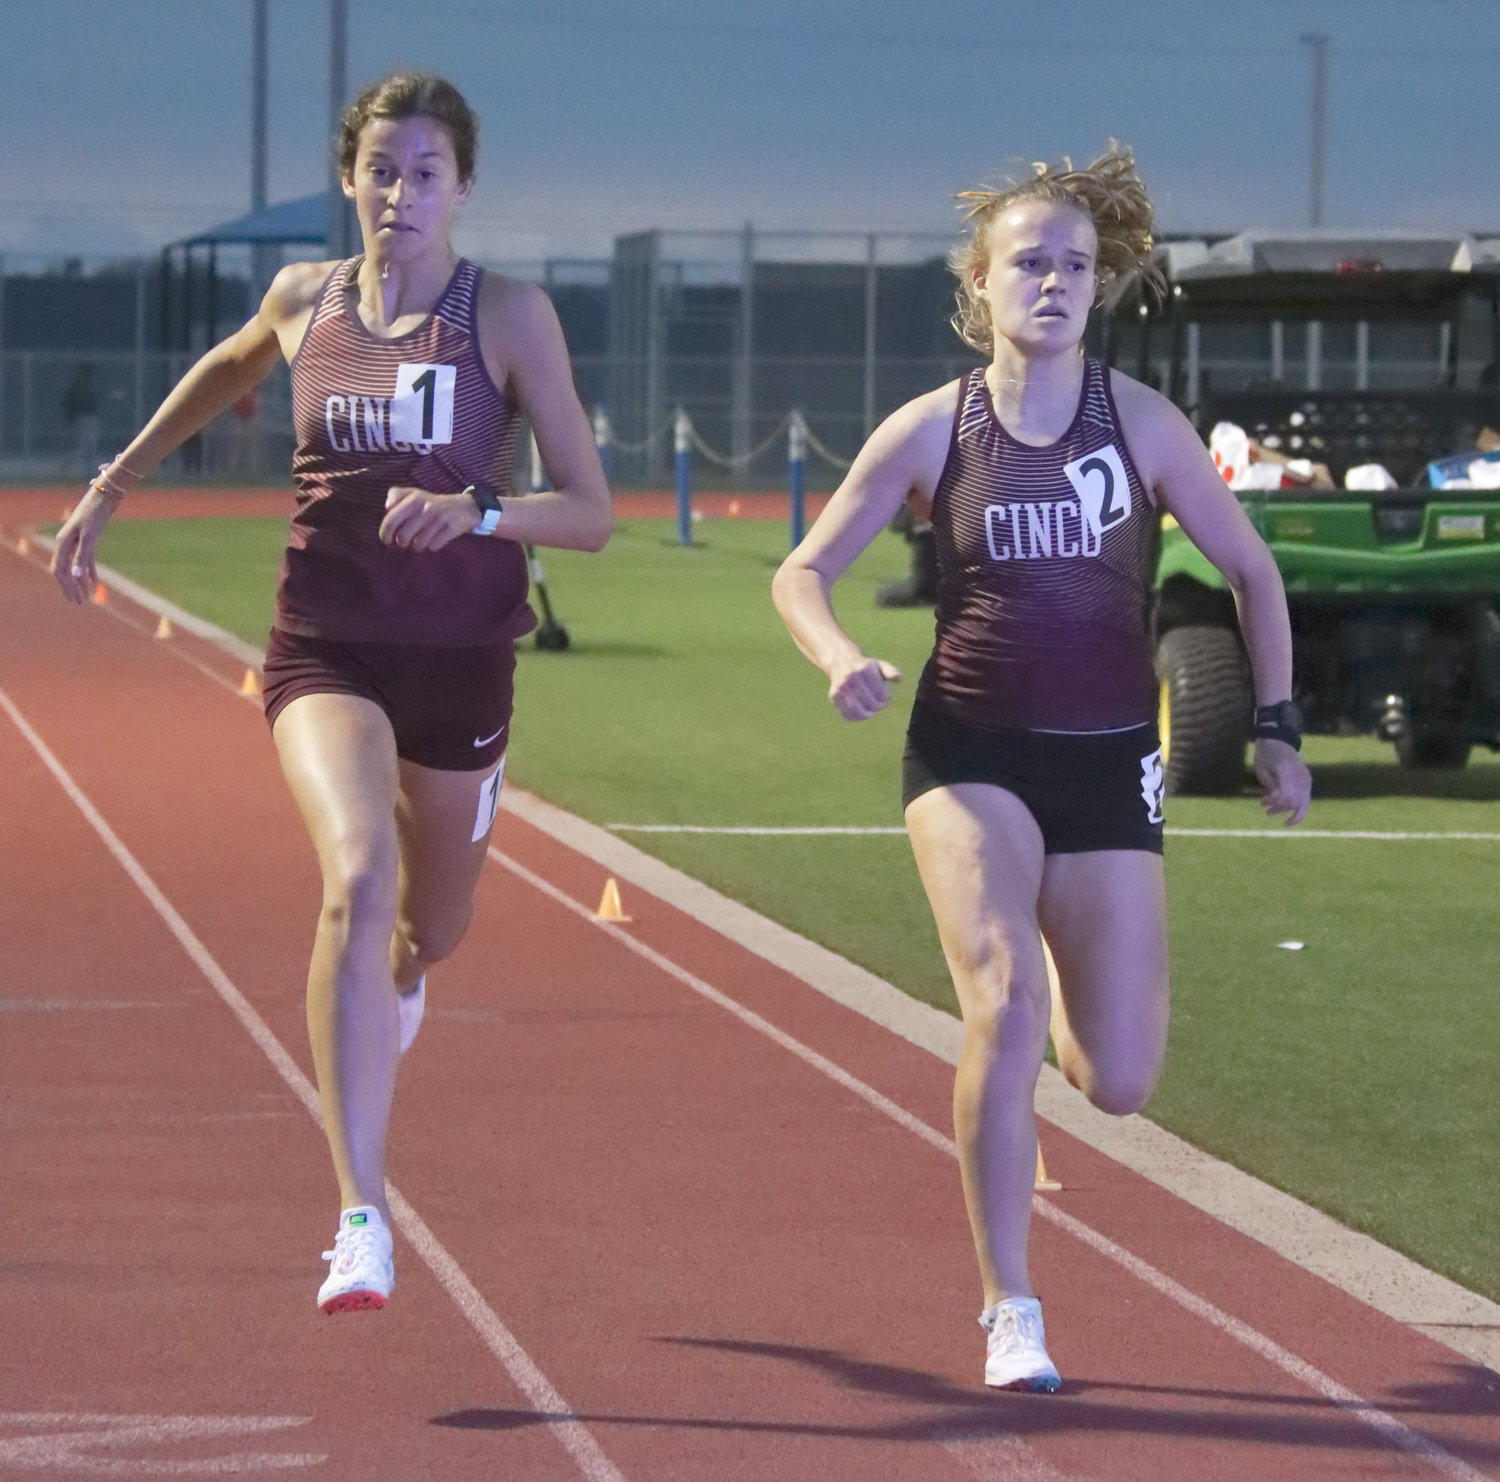 Longtime teammates Sophie Atkinson, left, and Heidi Nielson—shown here competing for Cinco Ranch at the 19-20-6A track and field area meet two weeks ago—are returning to state after starring at the UIL Region III-6A meet last weekend. Atkinson won the 1600-meter and 3200-meter runs and placed second in the 800-meter run. Nielson placed second in the 1600-meter and 3200-meter runs.